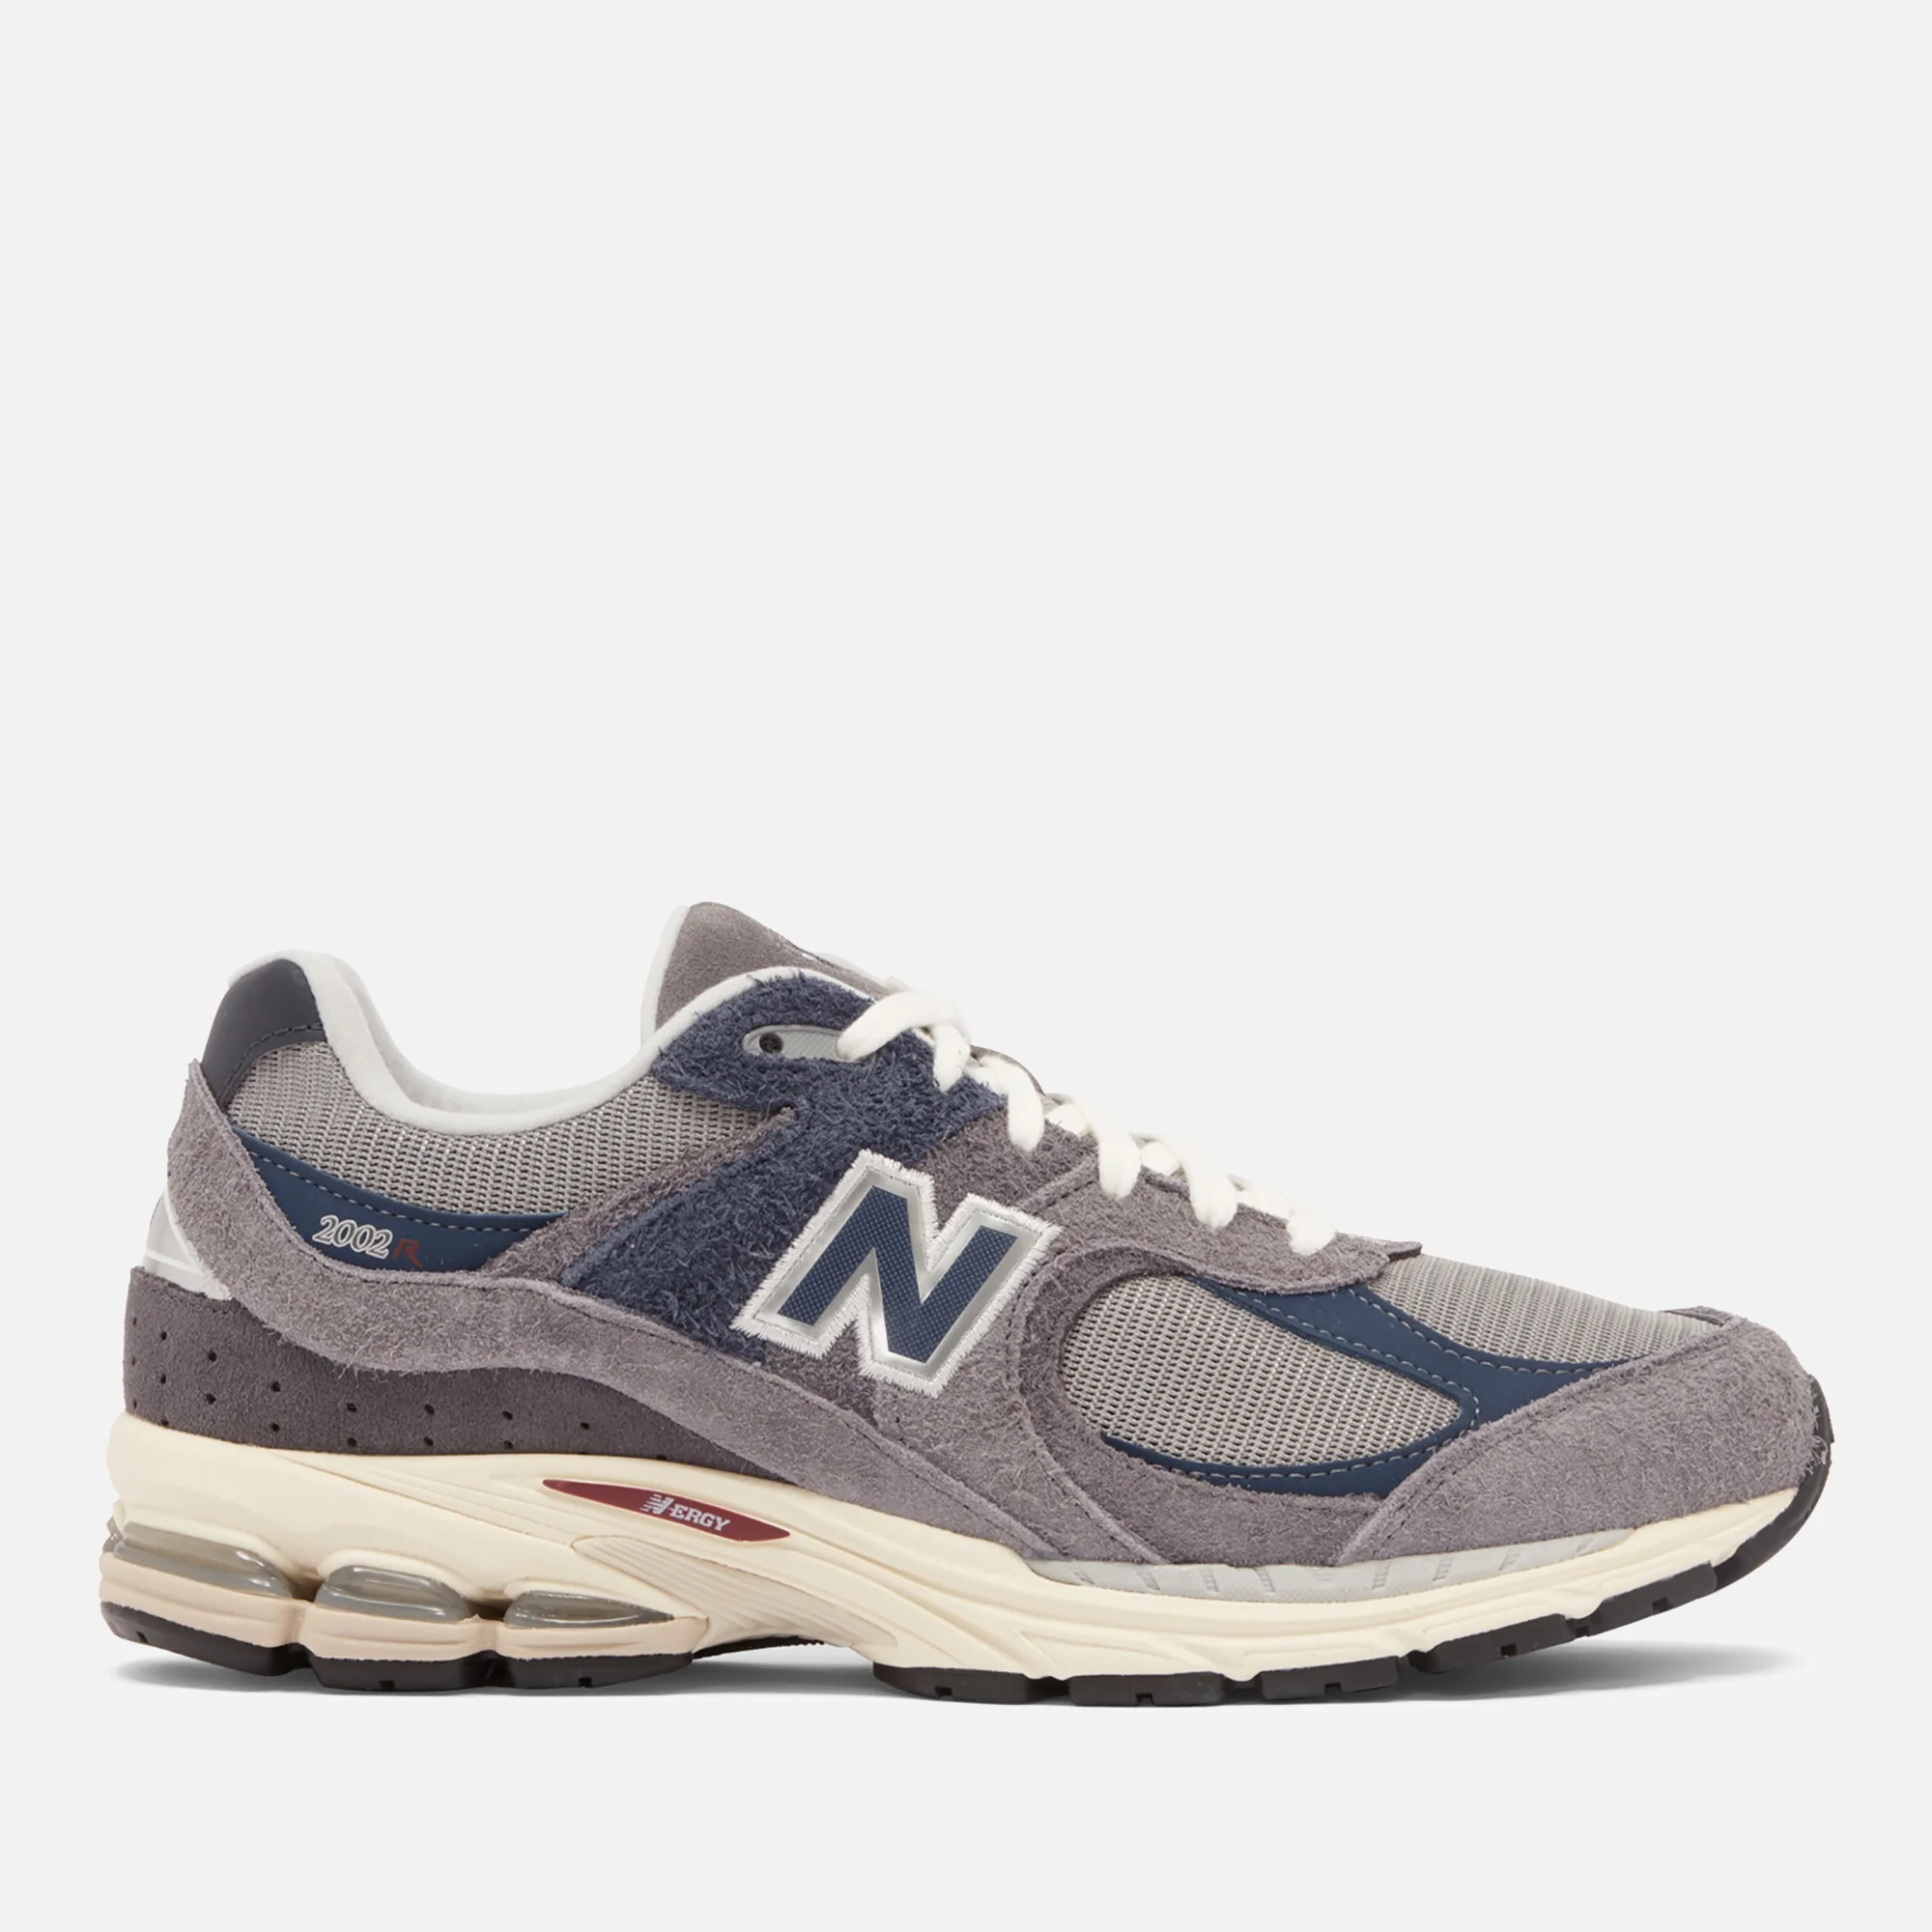 New Balance Men's 2002r Suede and Mesh Trainers Image 1